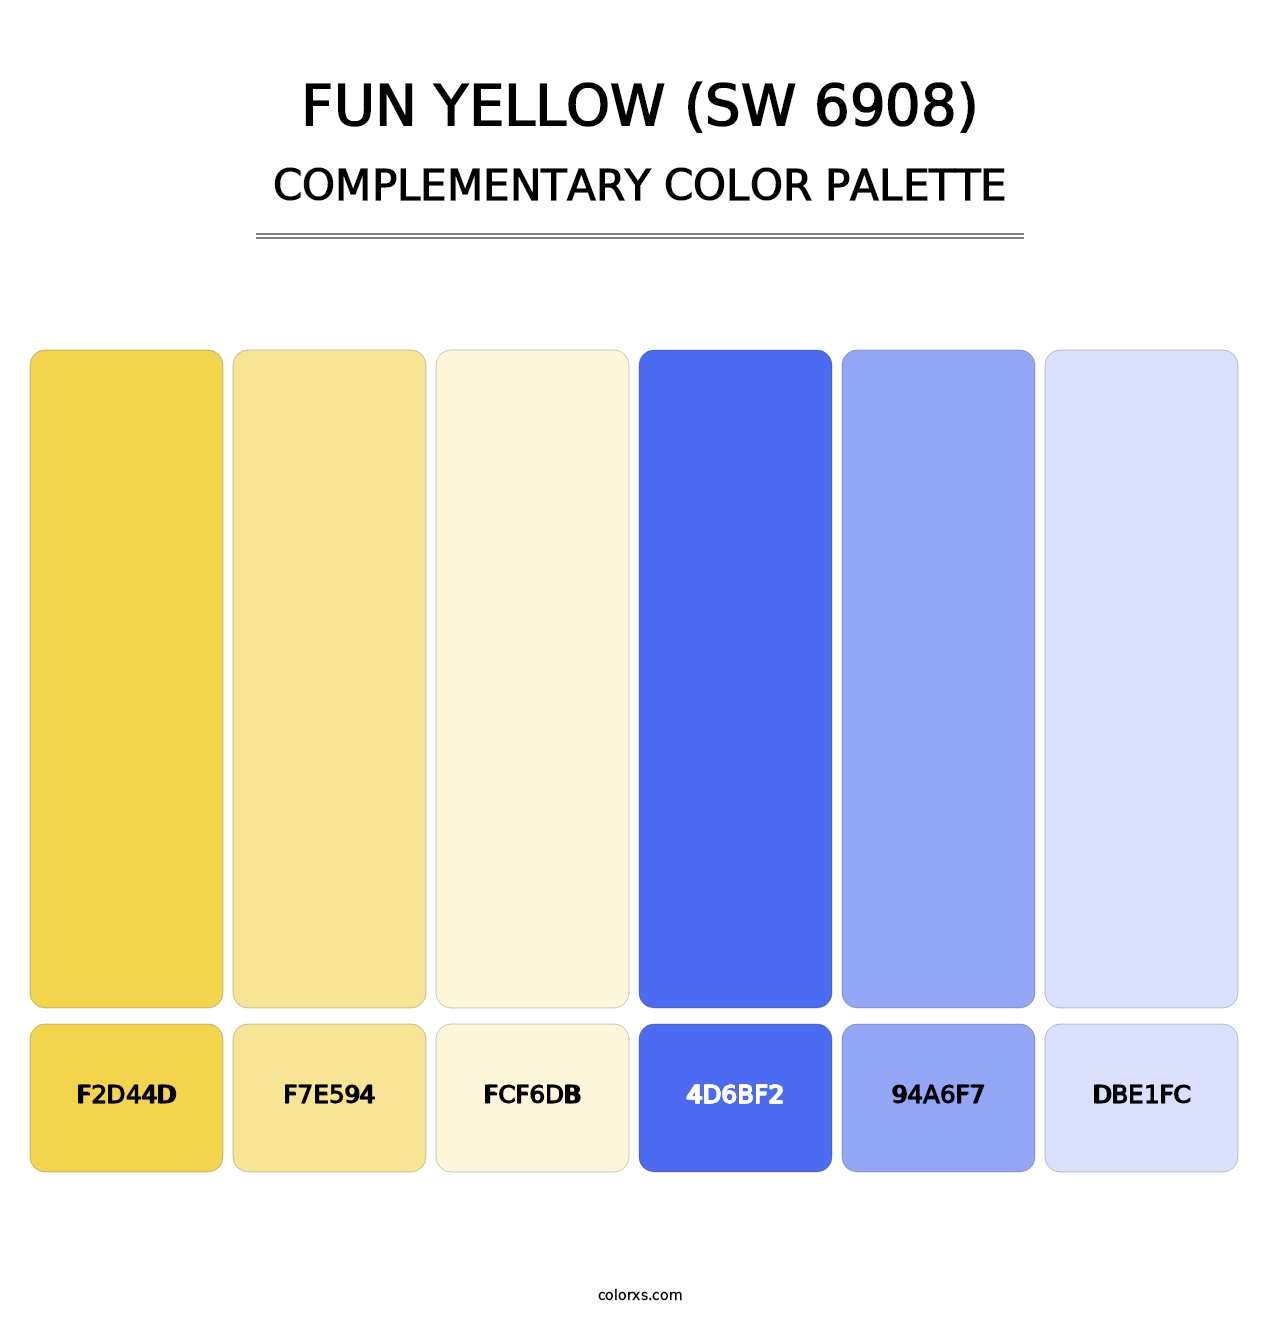 Fun Yellow (SW 6908) - Complementary Color Palette